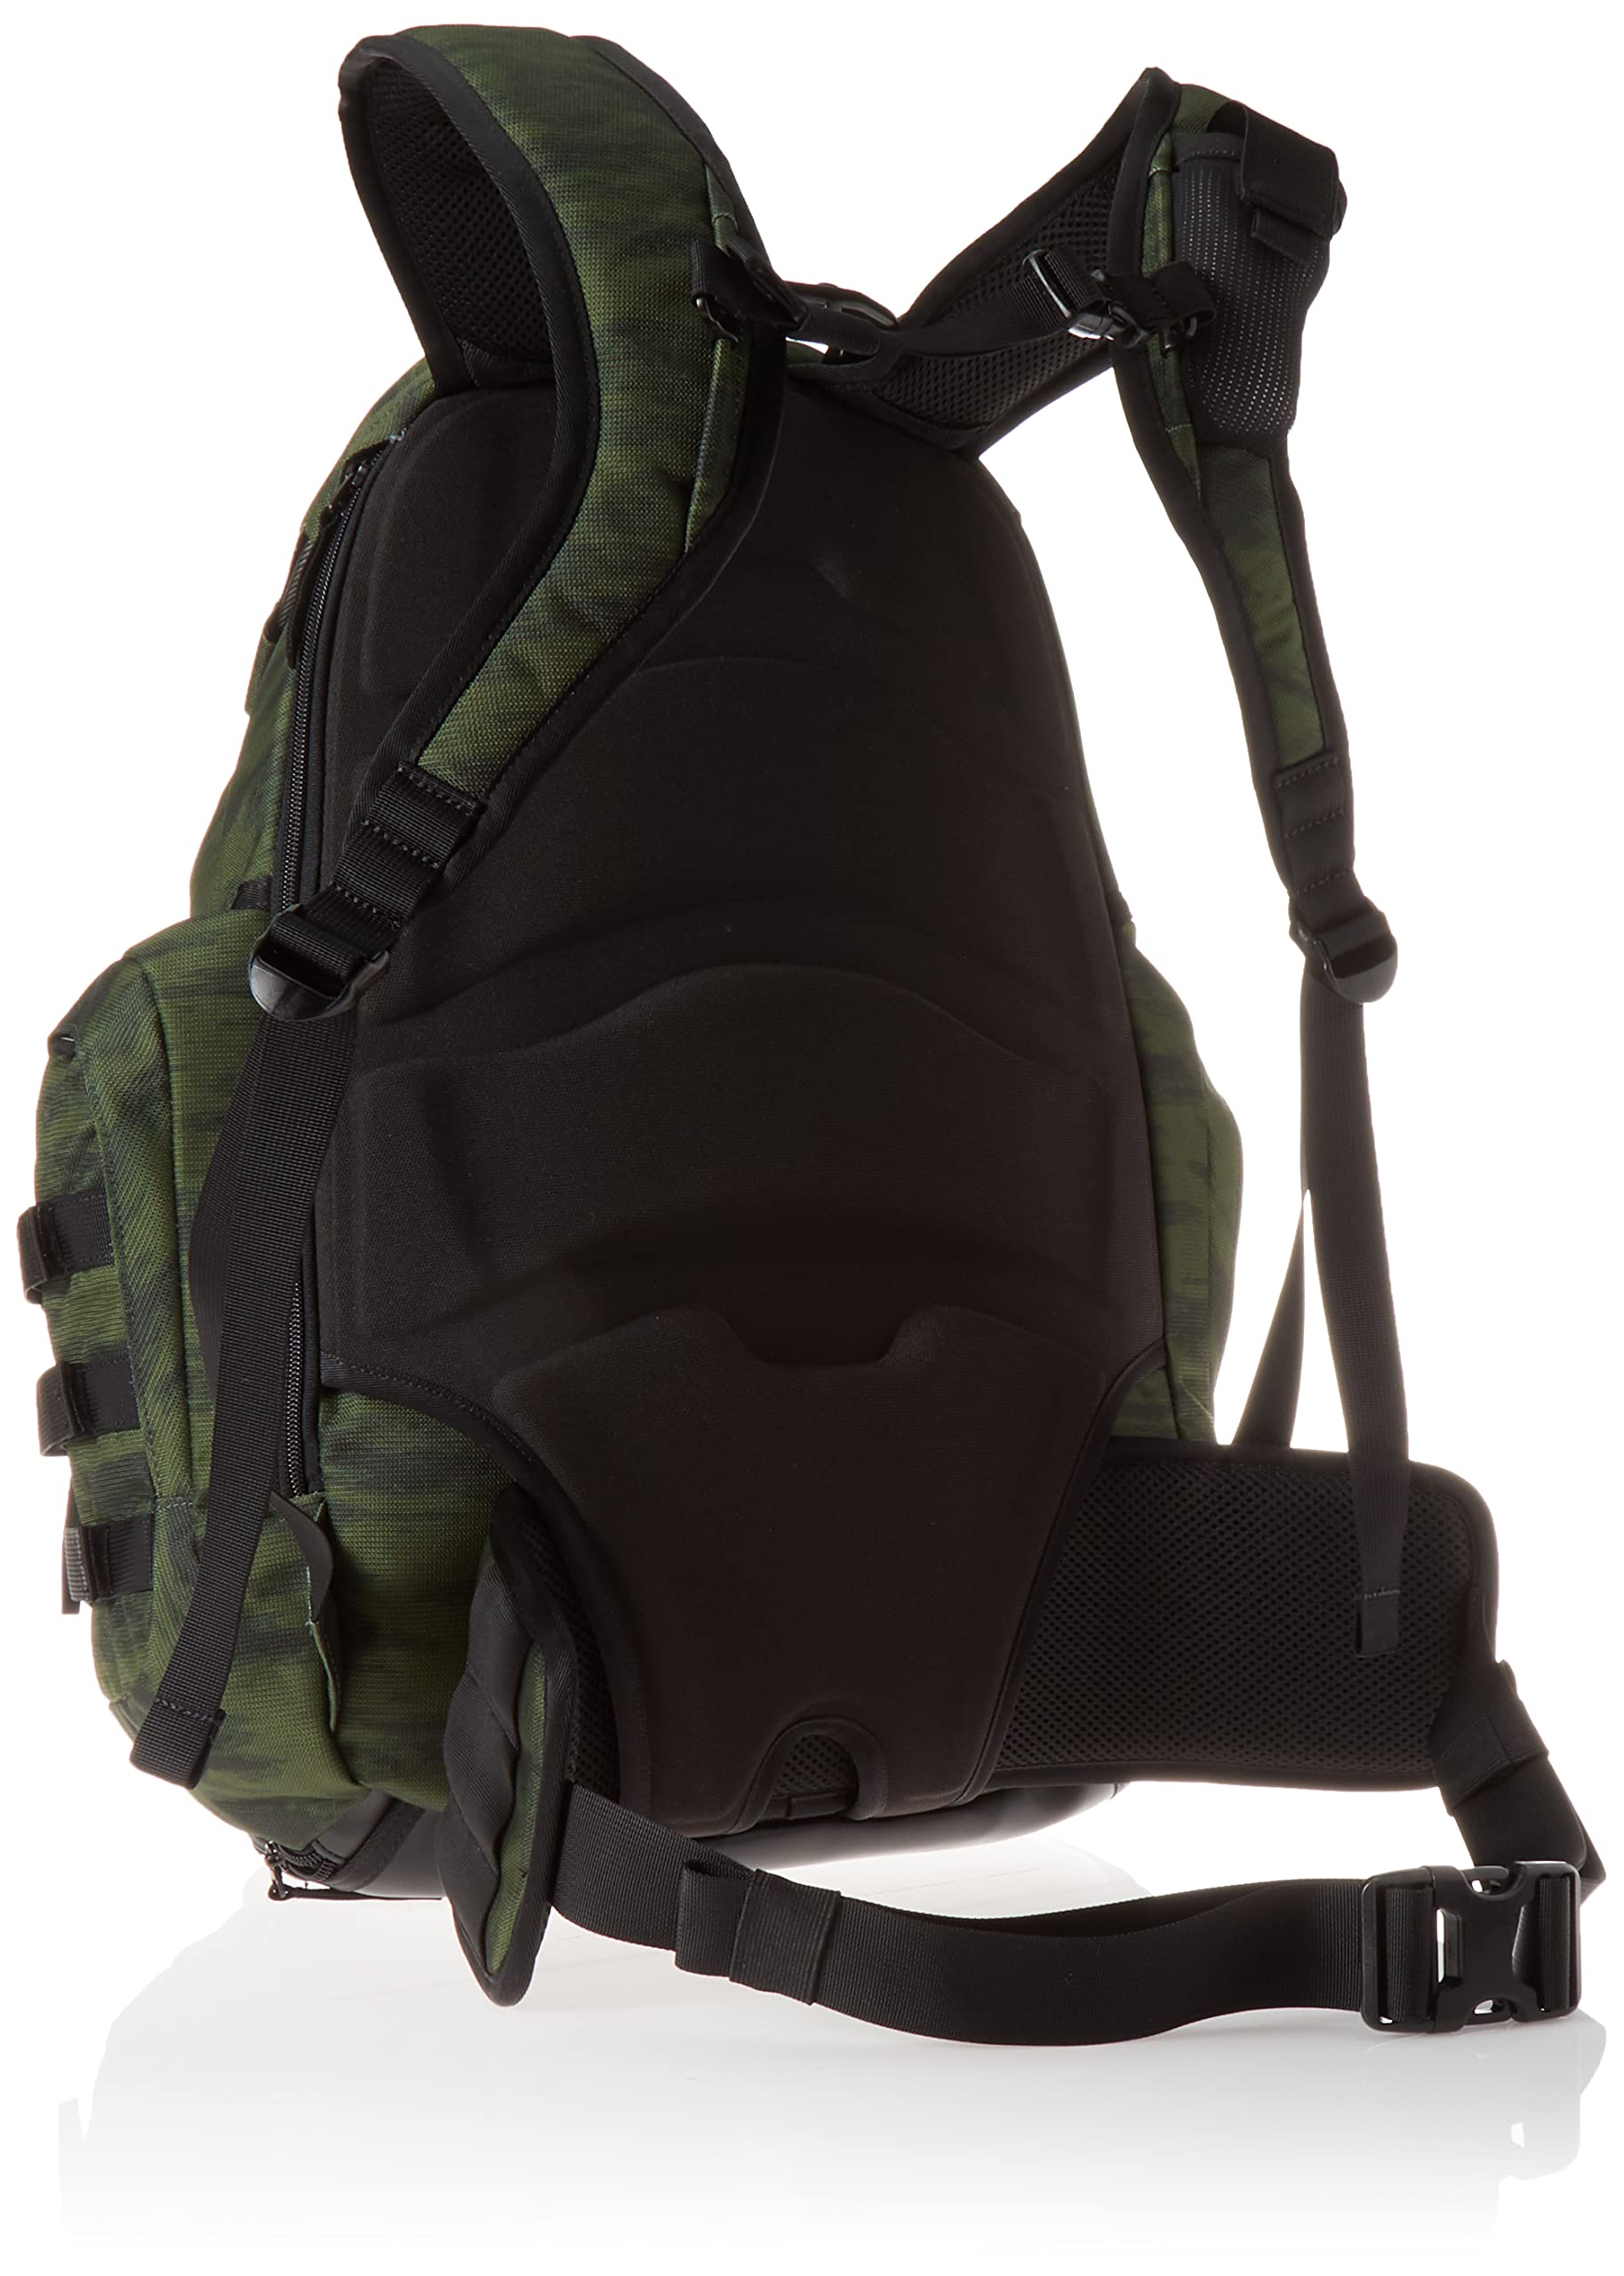 Oakley Kitchen Sink Backpack, Brush Tiger CAMO Green, One Size